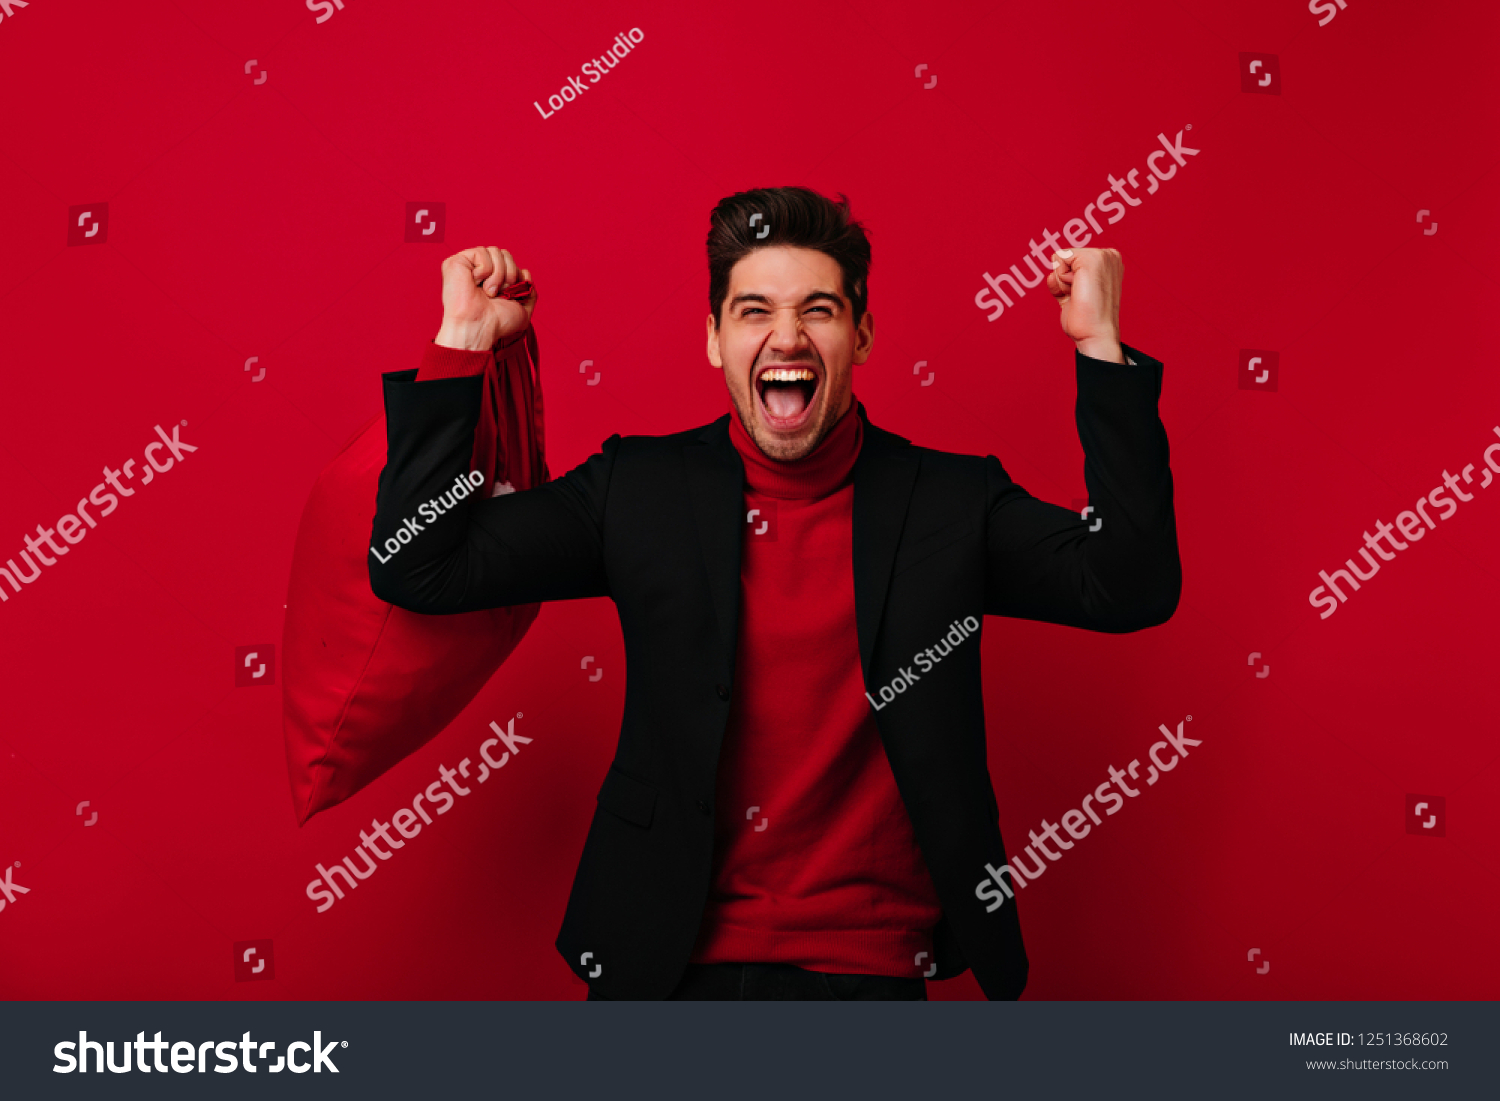 Joyful man with trendy haircut expressing happiness on red background. Refined caucasian guy posing in black jacket. #1251368602